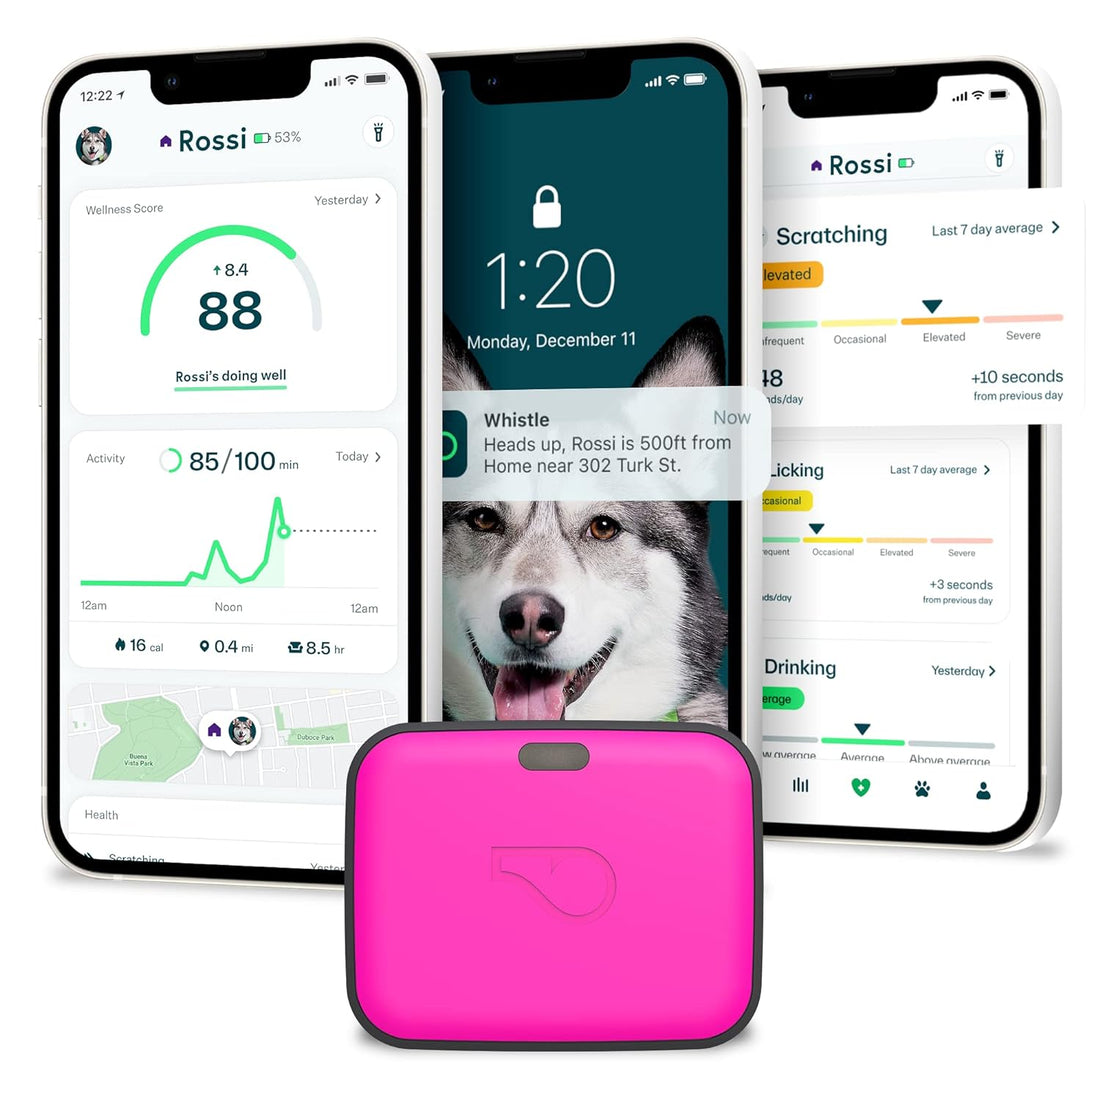 Whistle Go Explore - Ultimate Health & Location Tracker for Pets - Waterproof GPS Pet Tracker, Built-in Night Light, 20 Day Battery, Pet Fitness Tracker fits on collar